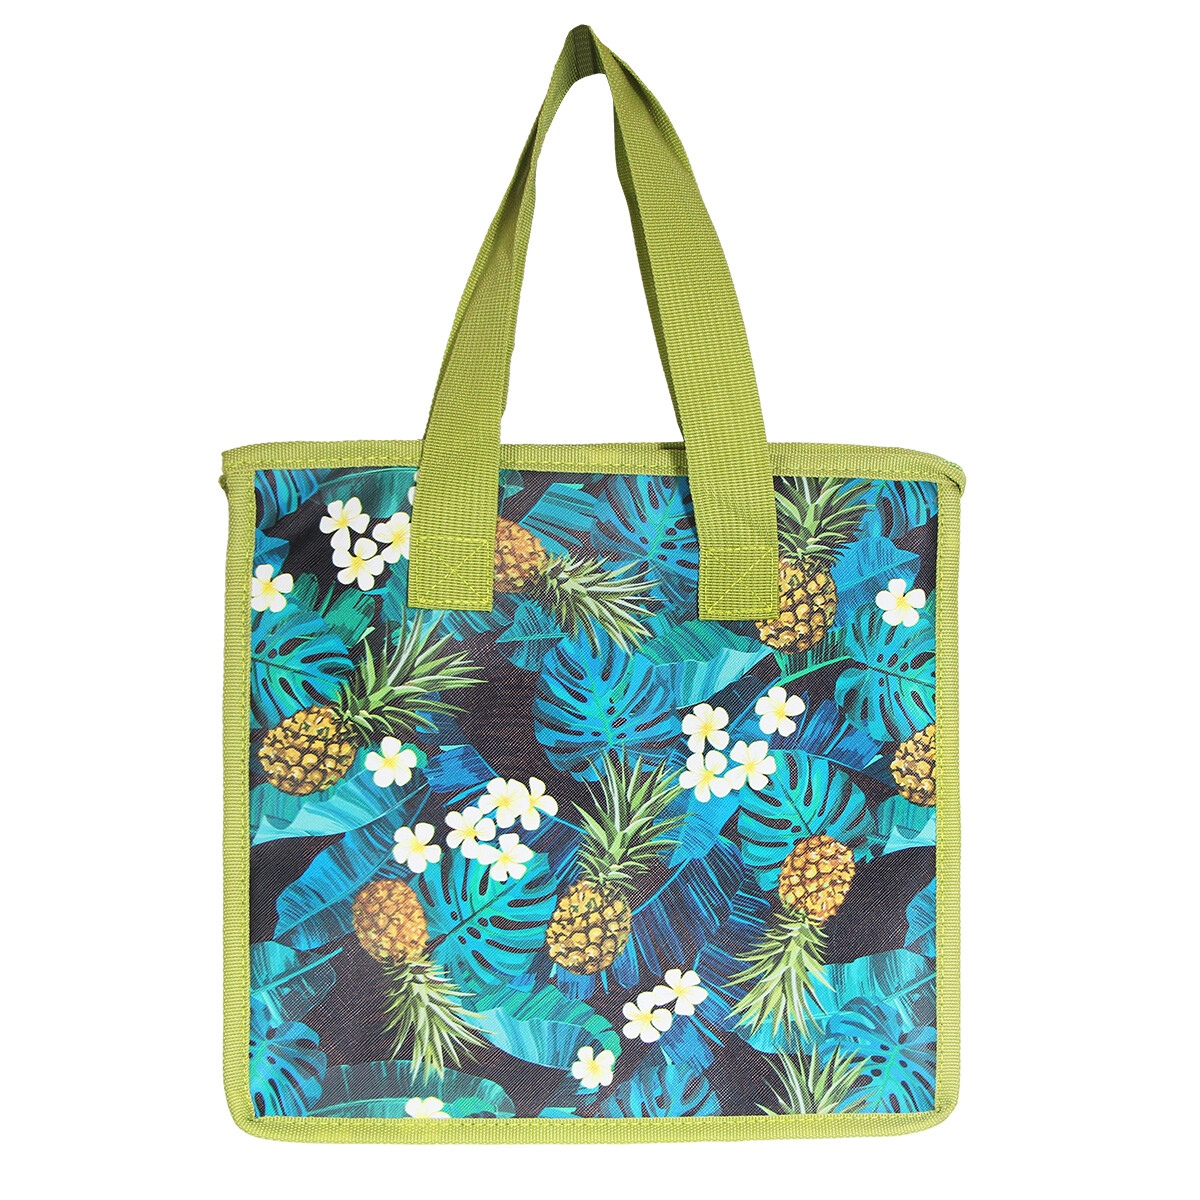 Insulated Reusable Cooler Bag Large Pineapple Olive